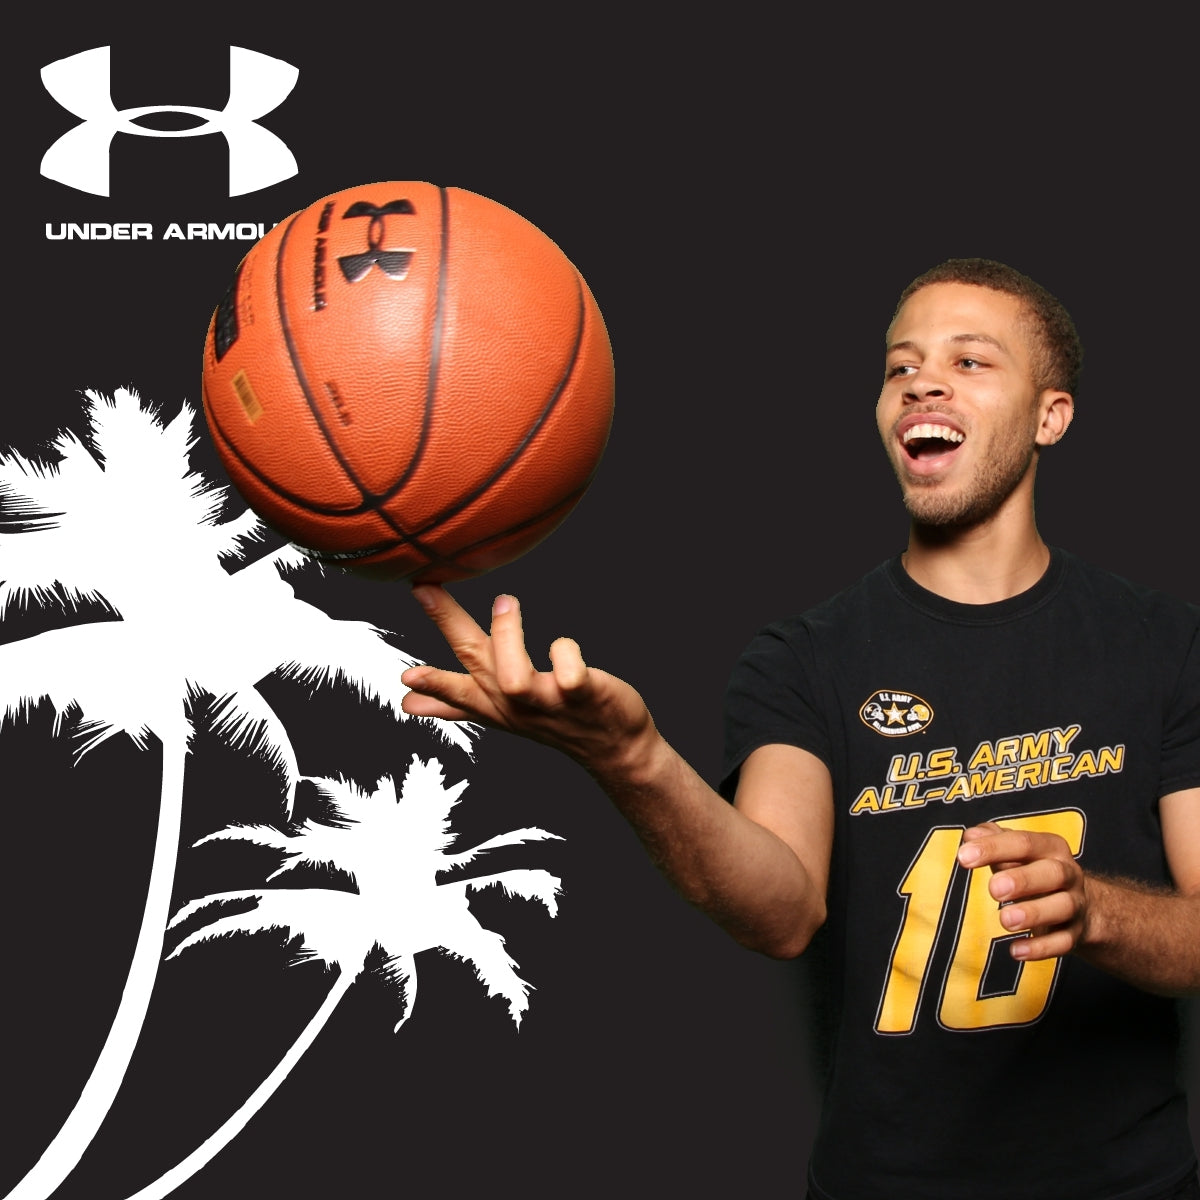 Green Screen Photo Booth Picture of a Basketball Player Spinning a Ball